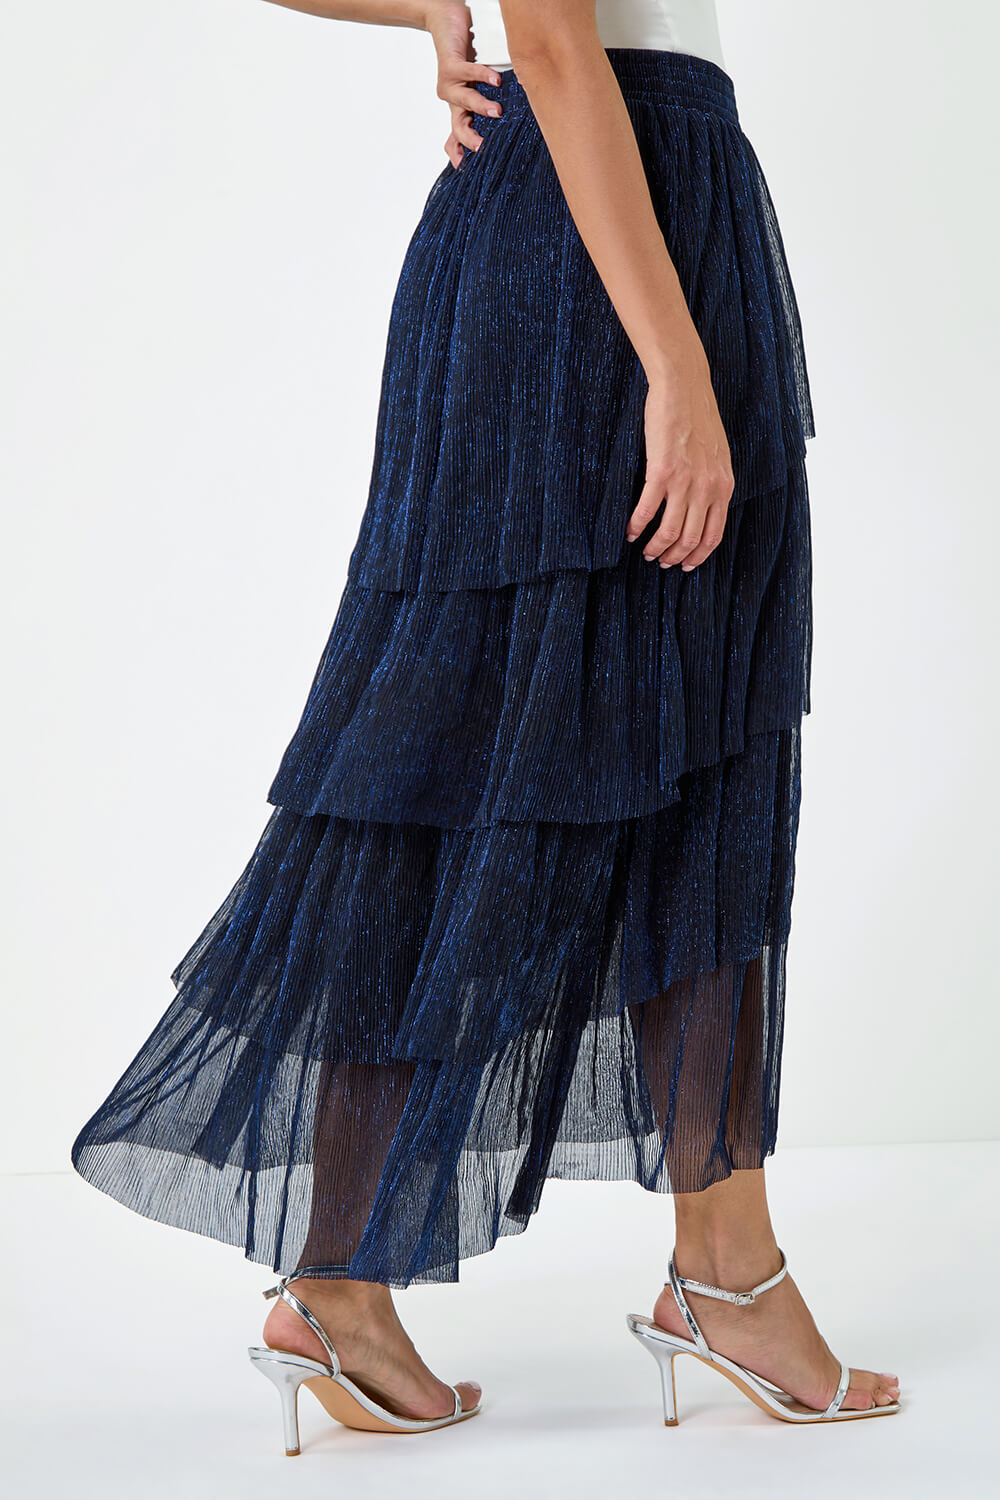 Midnight Blue Shimmer Tiered Mesh Maxi Skirt, Image 4 of 5